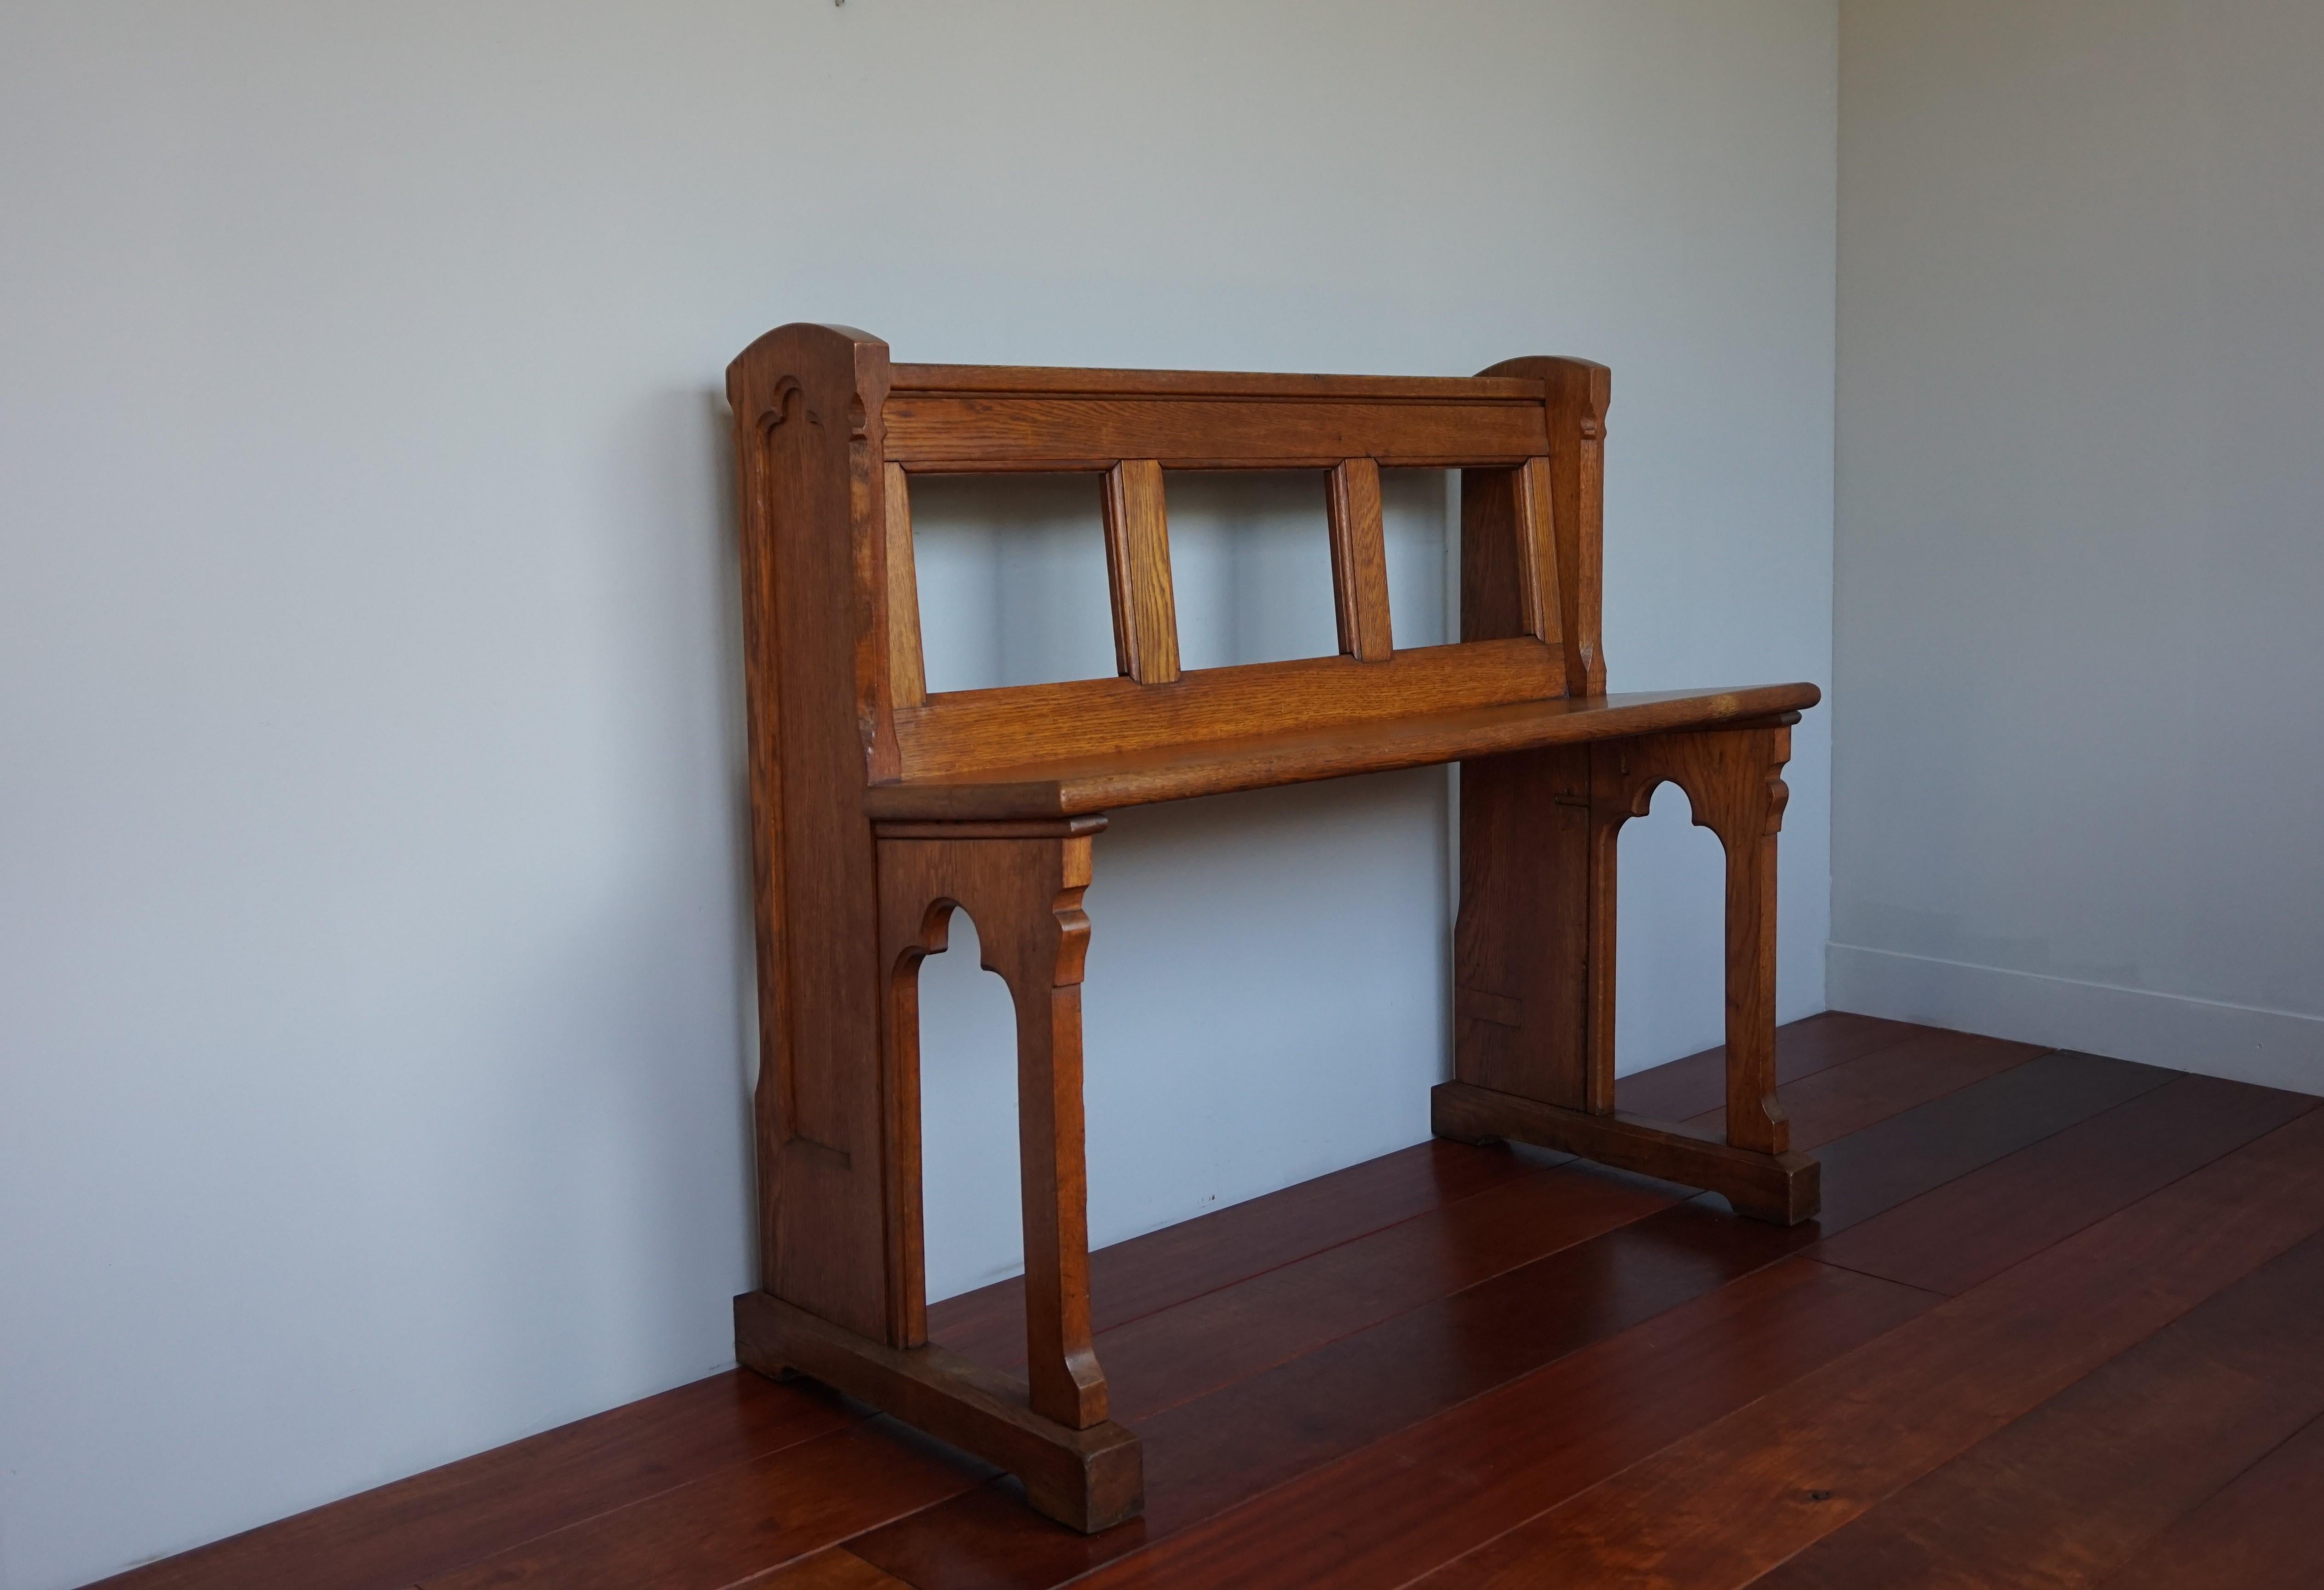 Handcrafted Gothic bench with church window-like openings in the sides.

When we first saw this Gothic Revival church bench we immediately fell in love with its open design and light color. The former owners explained us how this once was a much